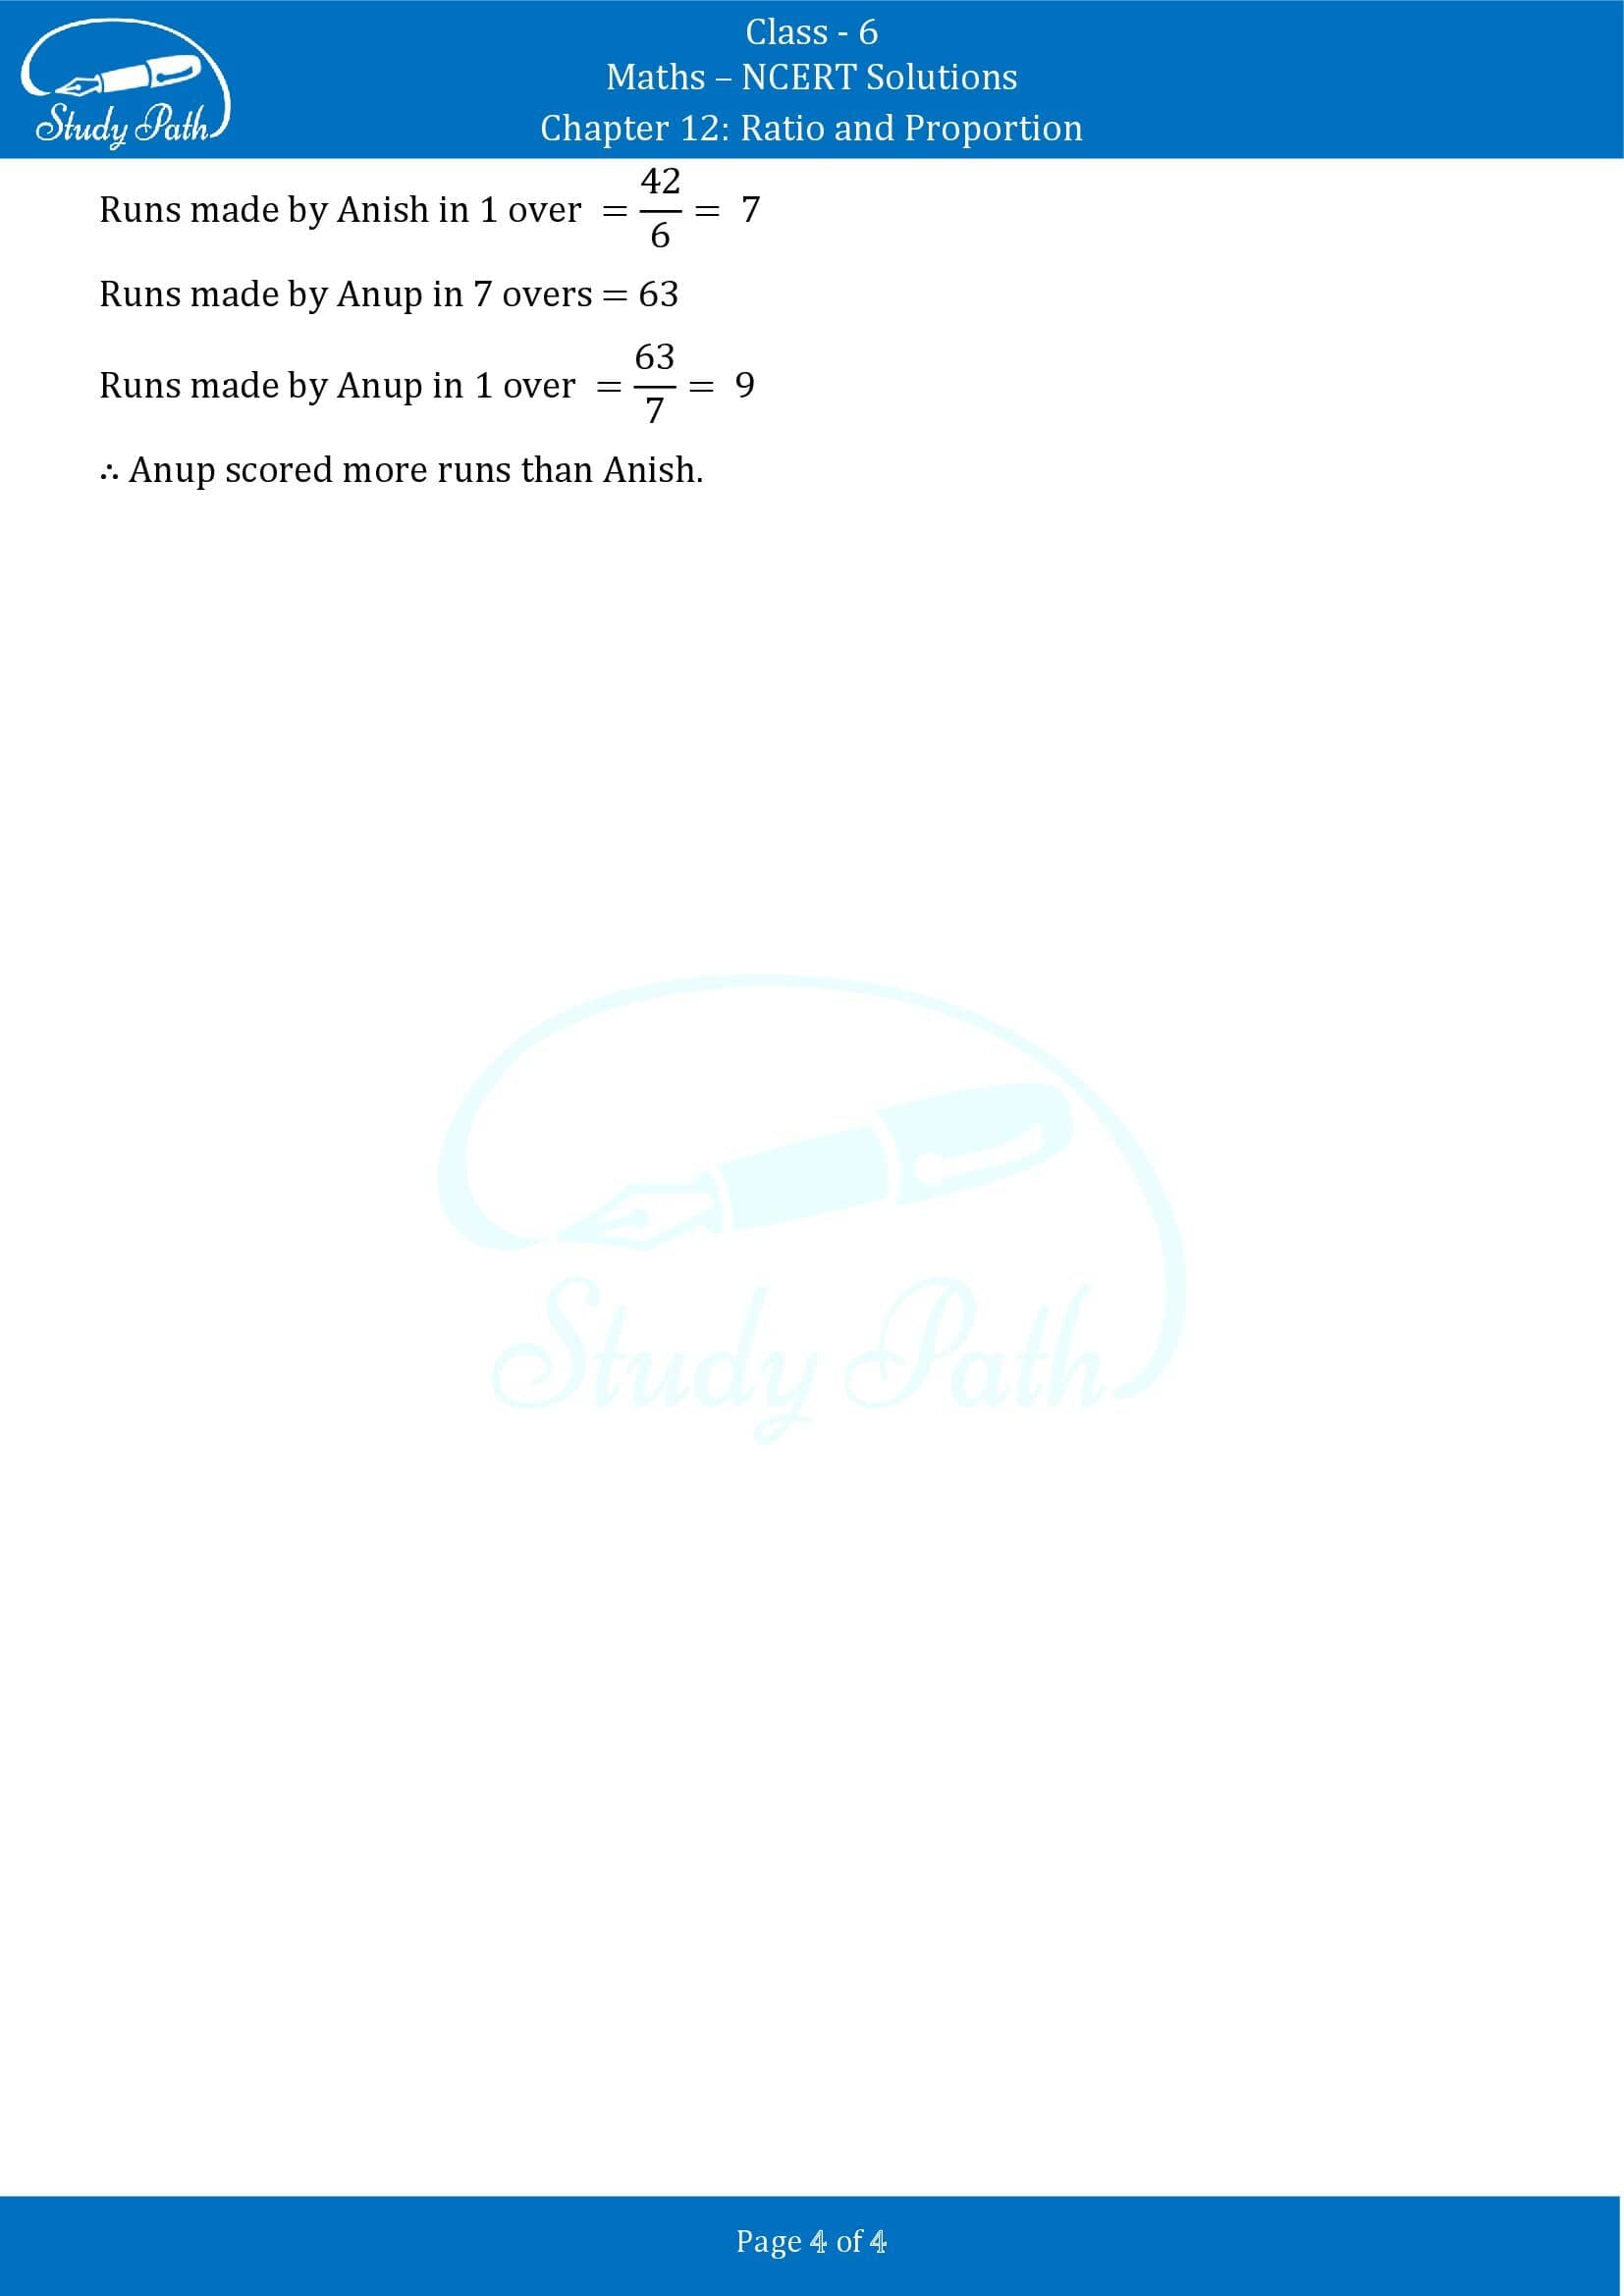 NCERT Solutions for Class 6 Maths Chapter 12 Ratio and Proportion Exercise 12.3 00004